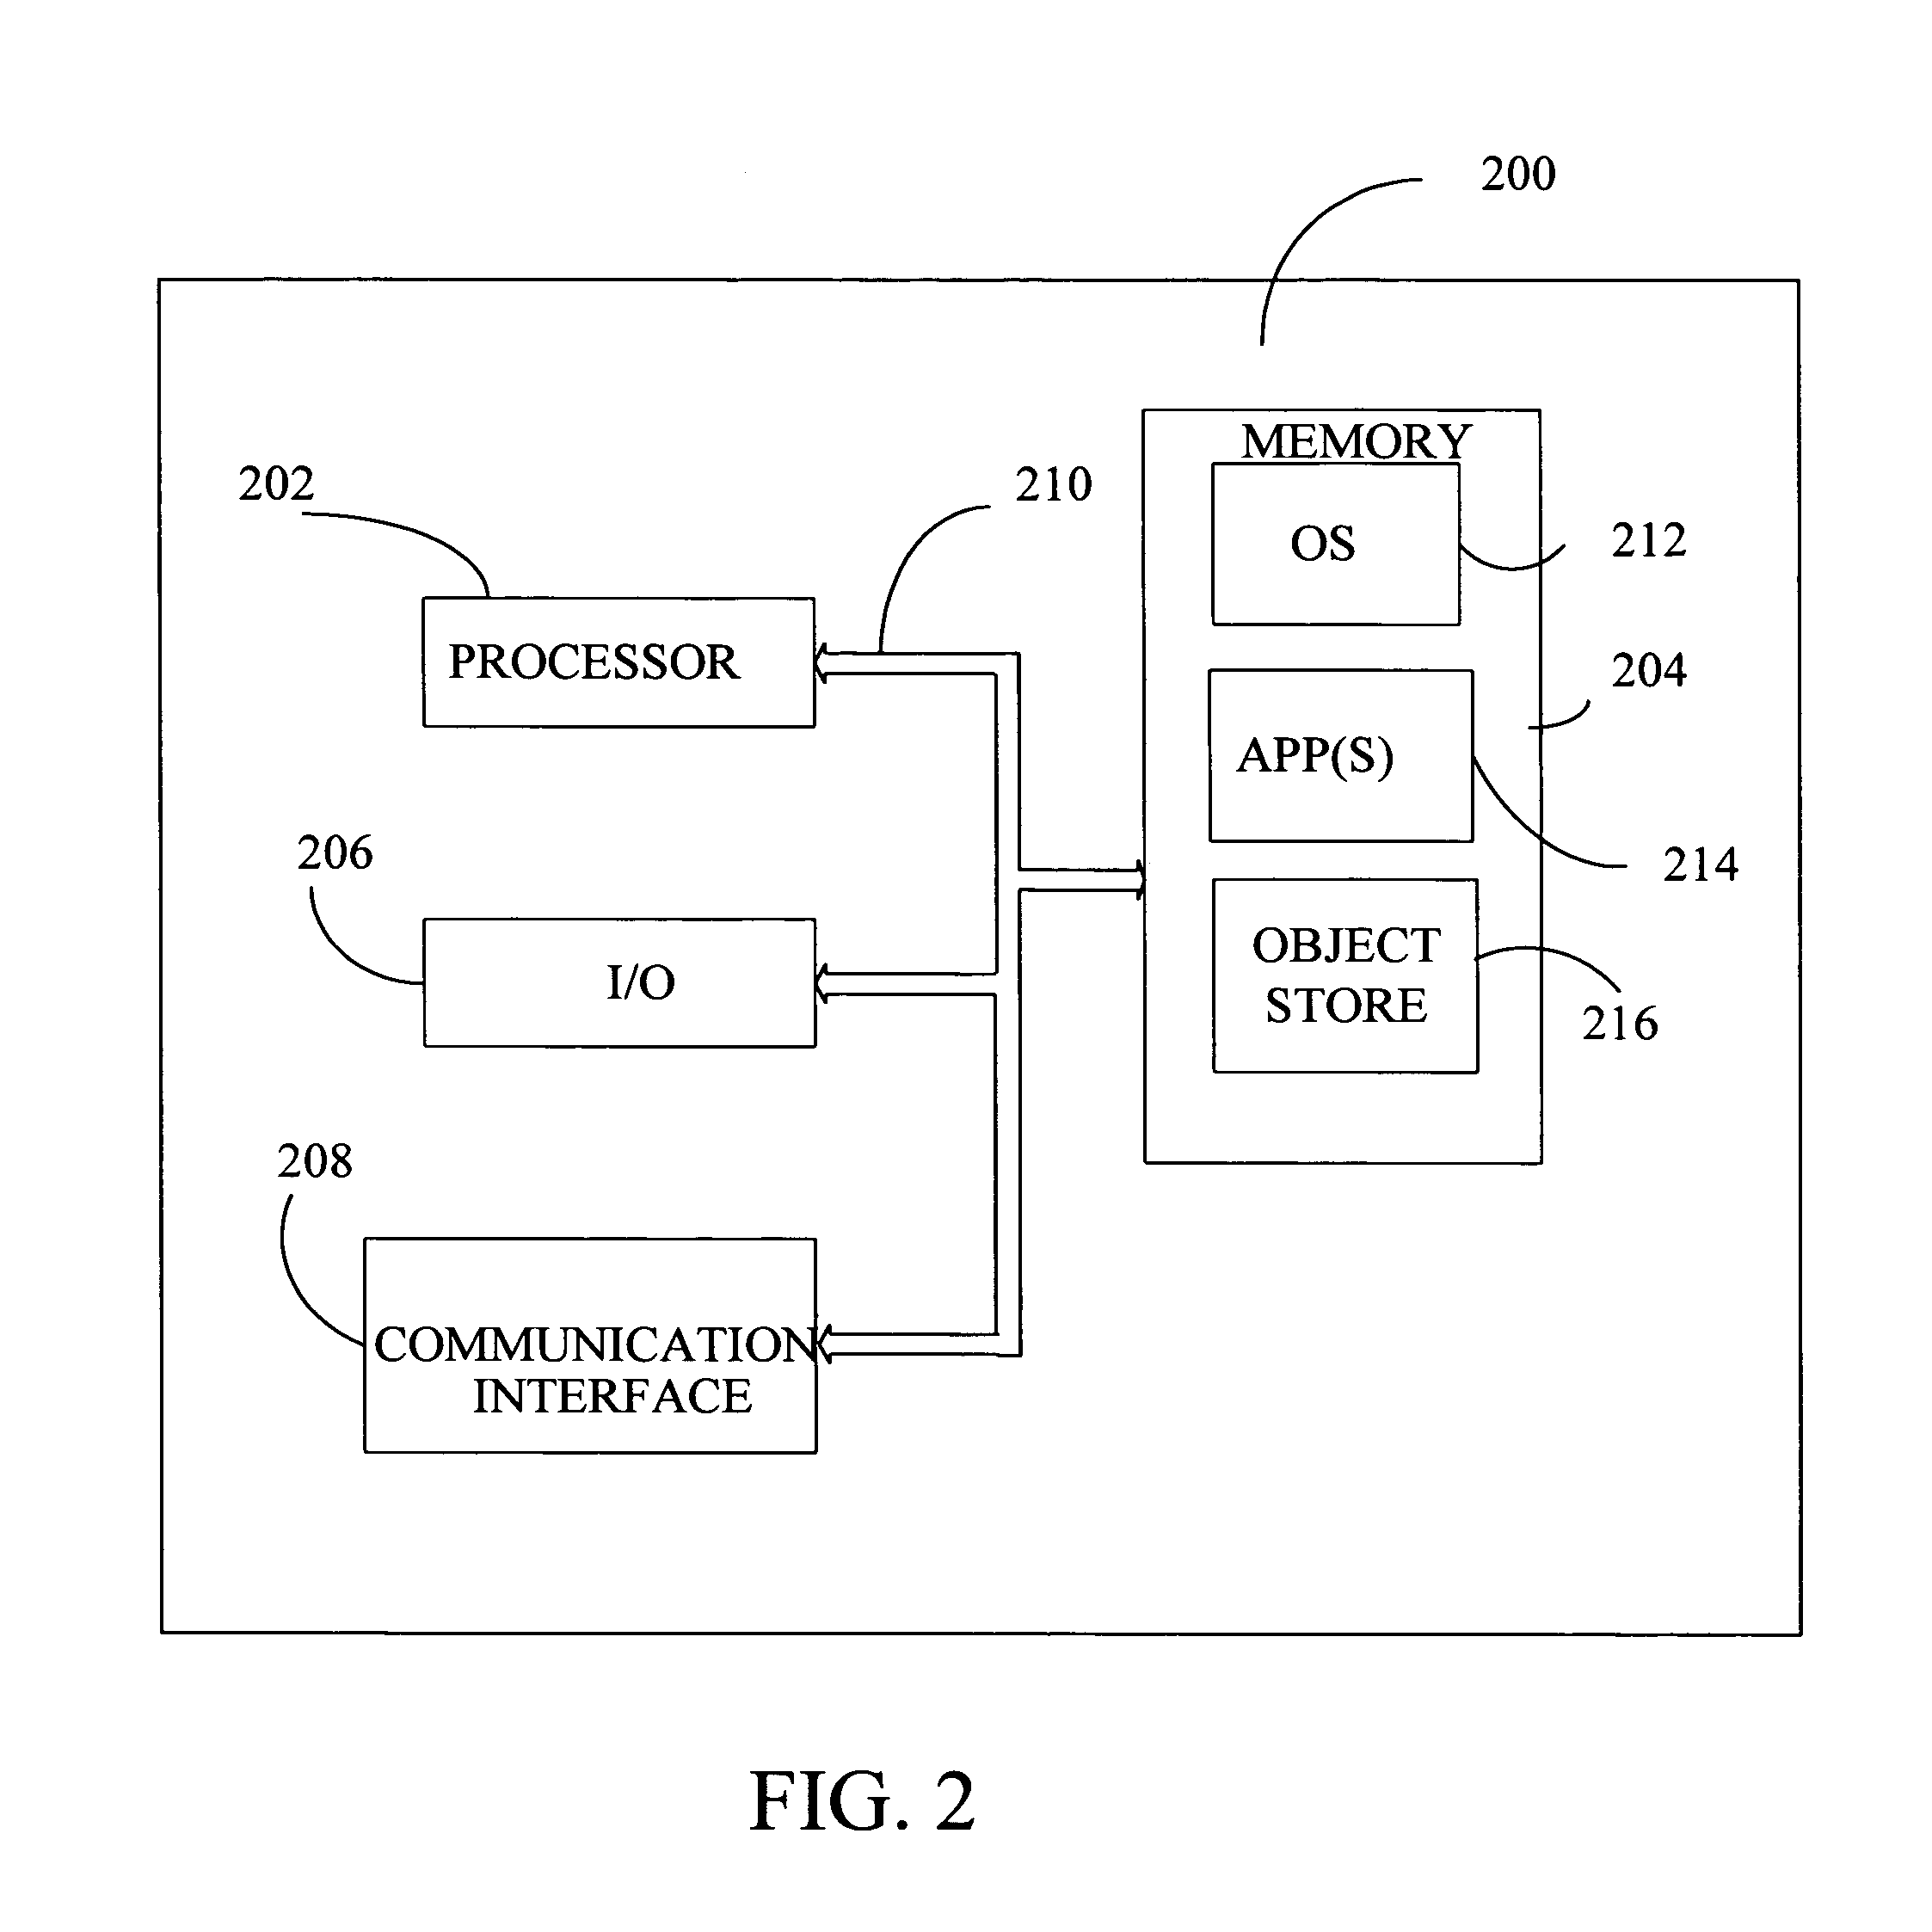 Method of noise reduction using correction and scaling vectors with partitioning of the acoustic space in the domain of noisy speech